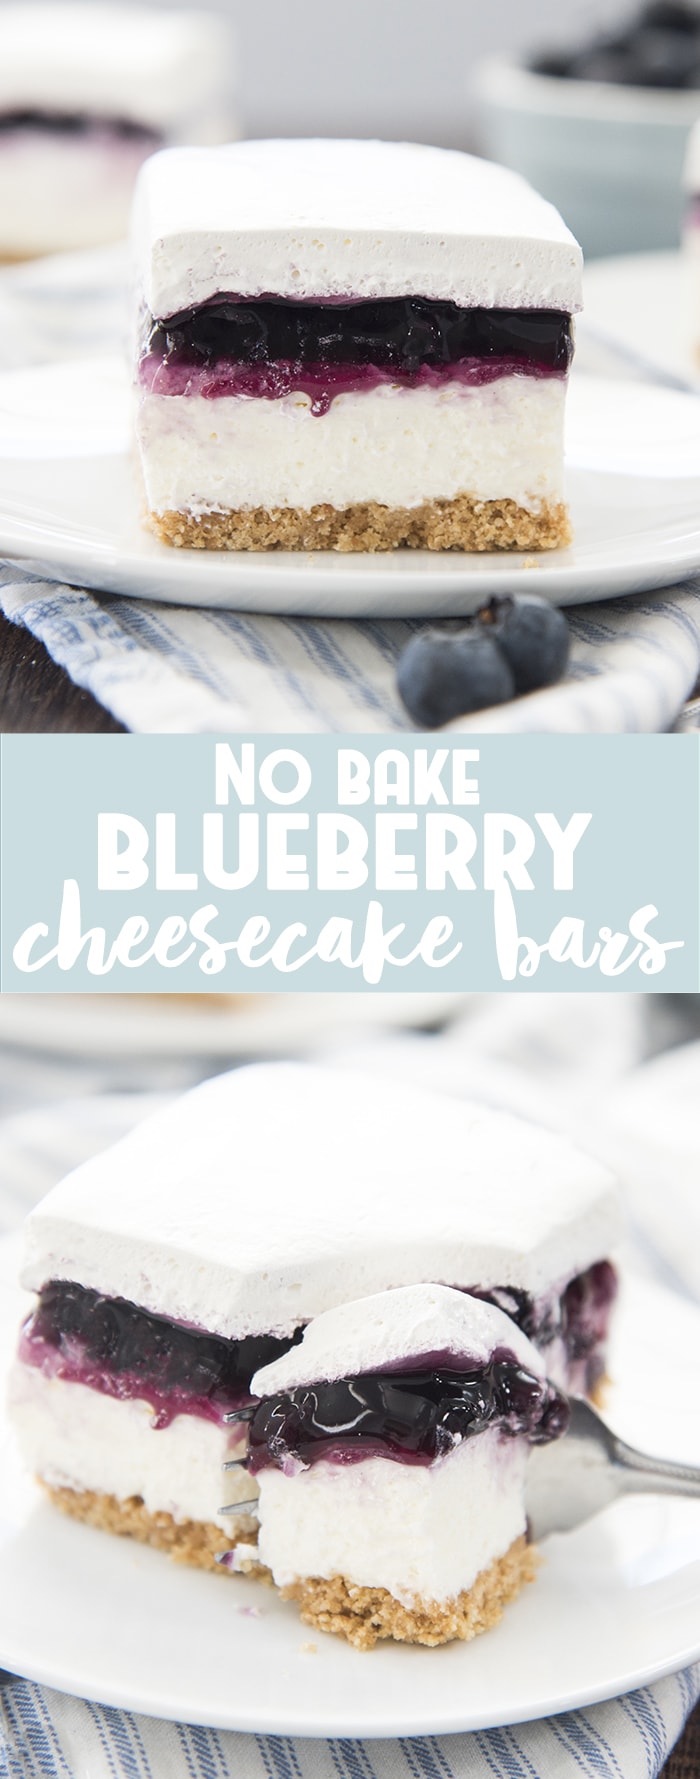 No Bake Blueberry Cheesecake Bars - Like Mother, Like Daughter